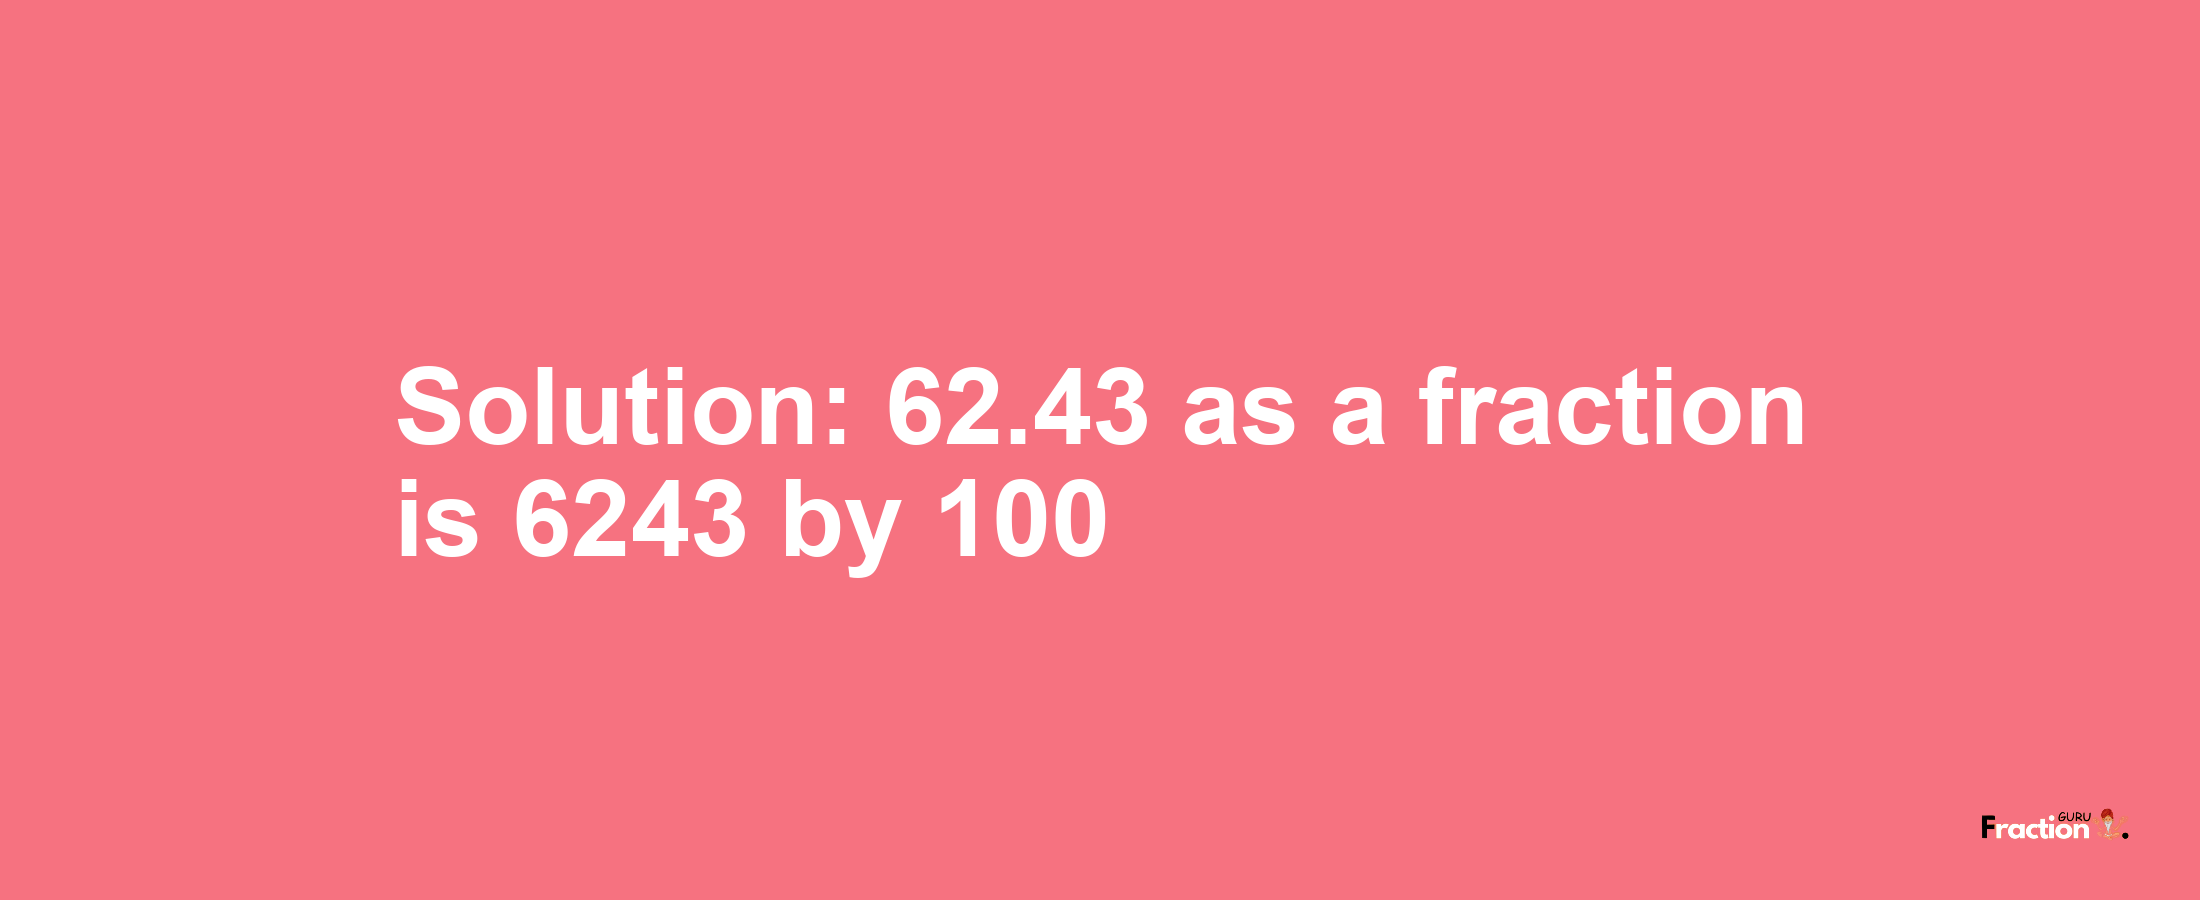 Solution:62.43 as a fraction is 6243/100